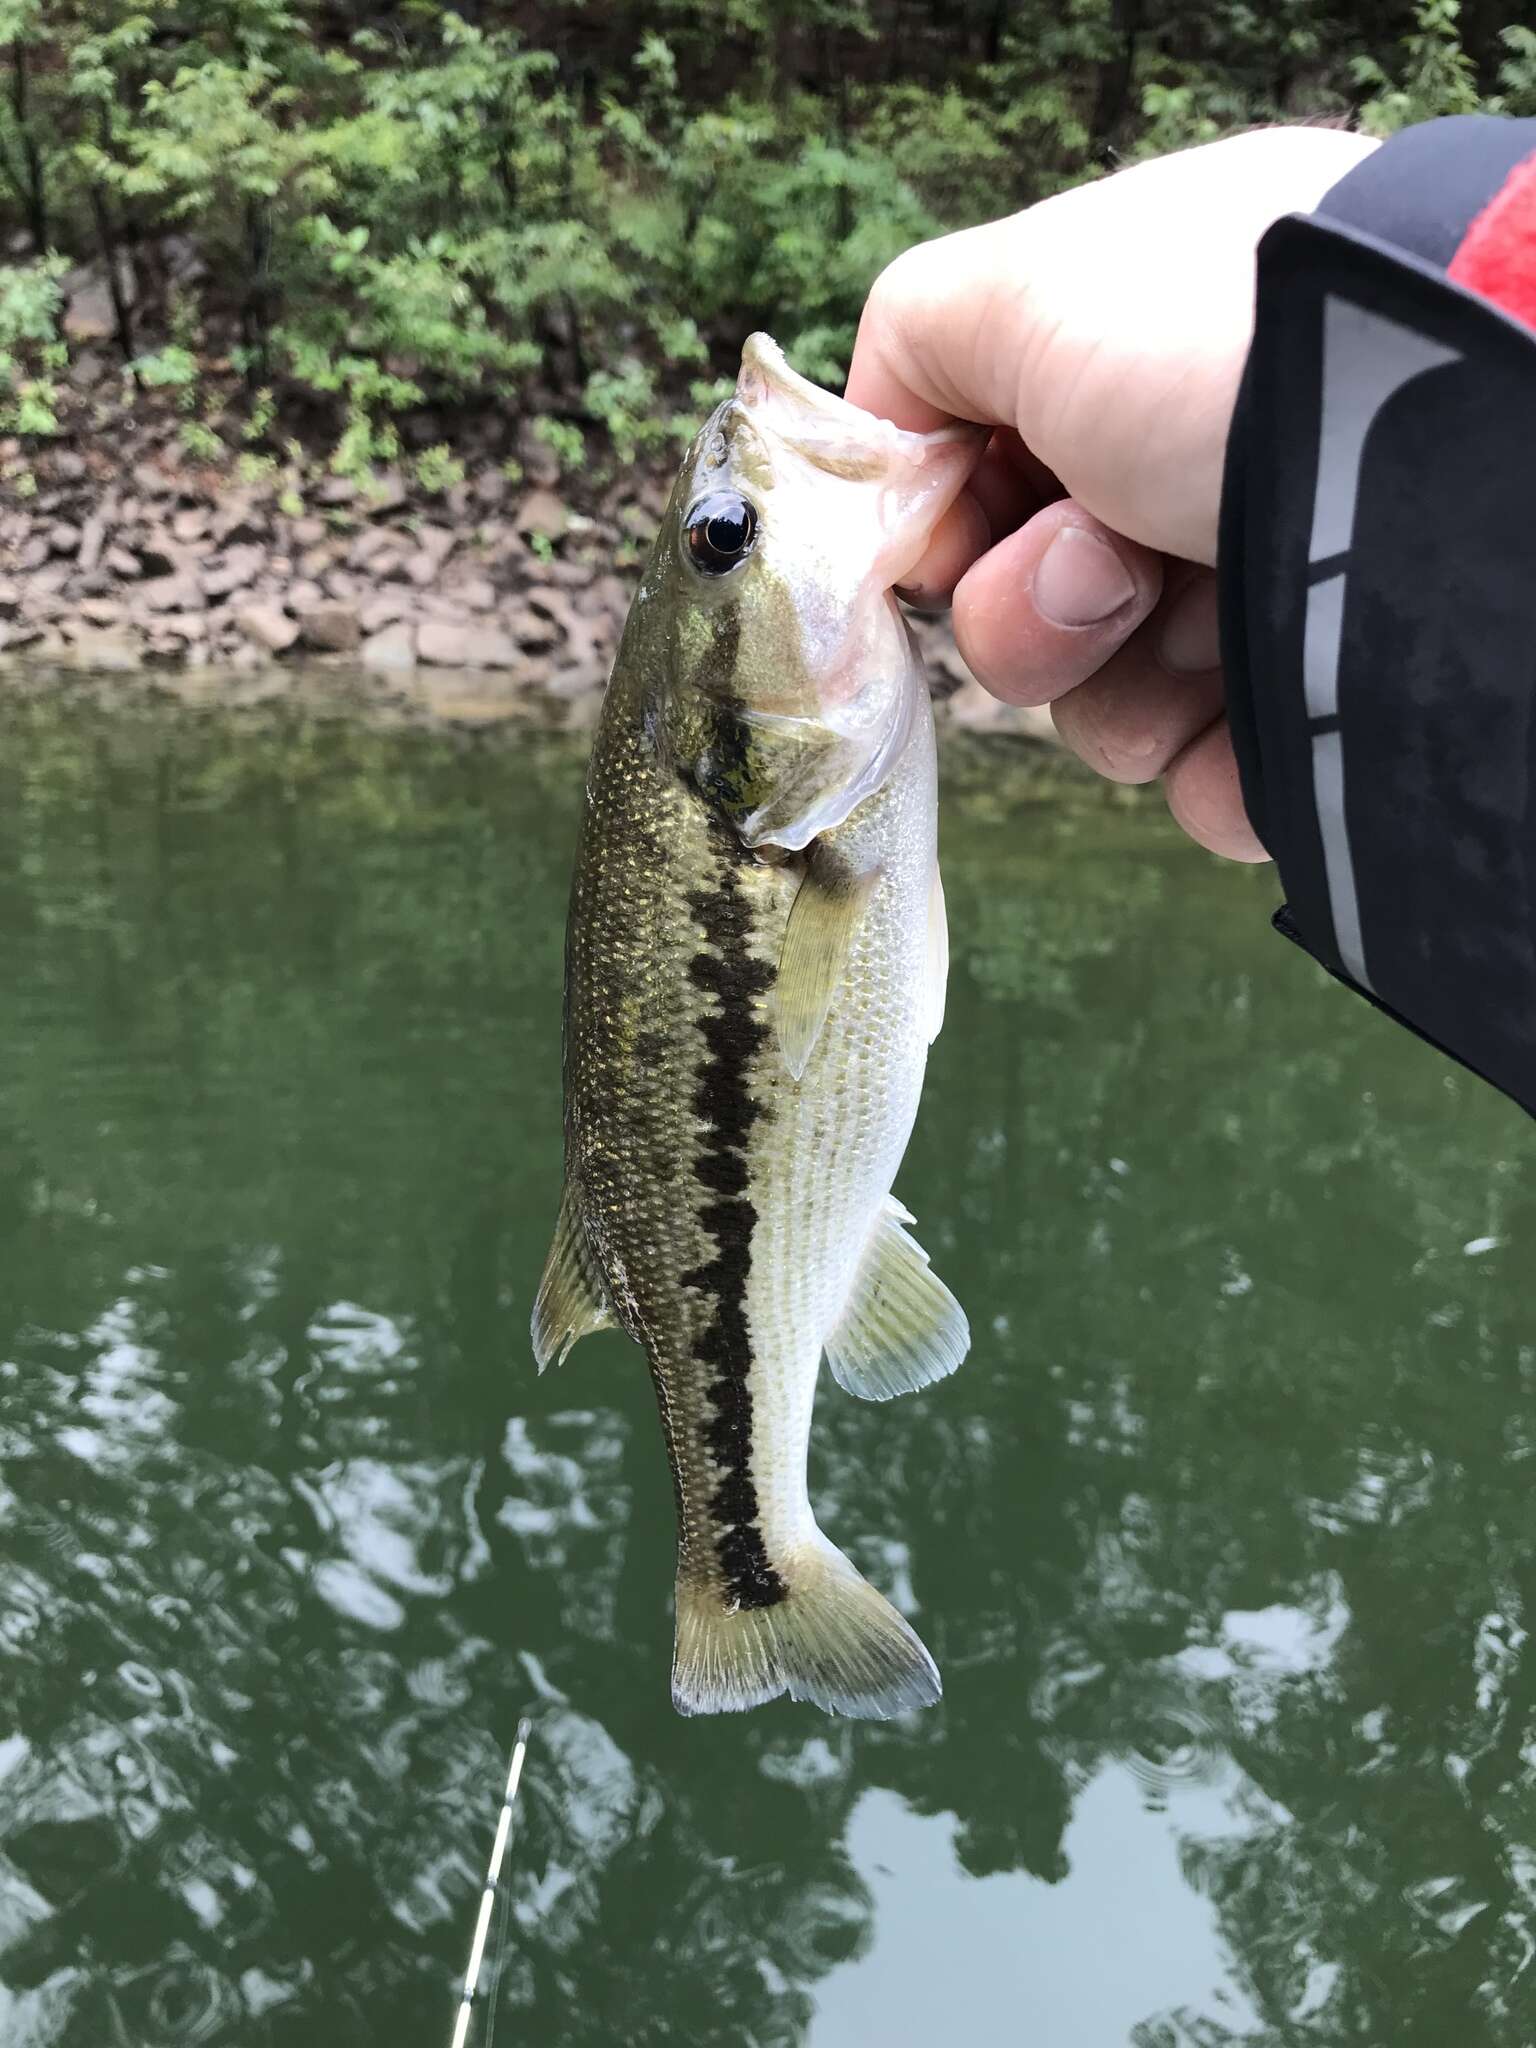 Image of Spotted bass